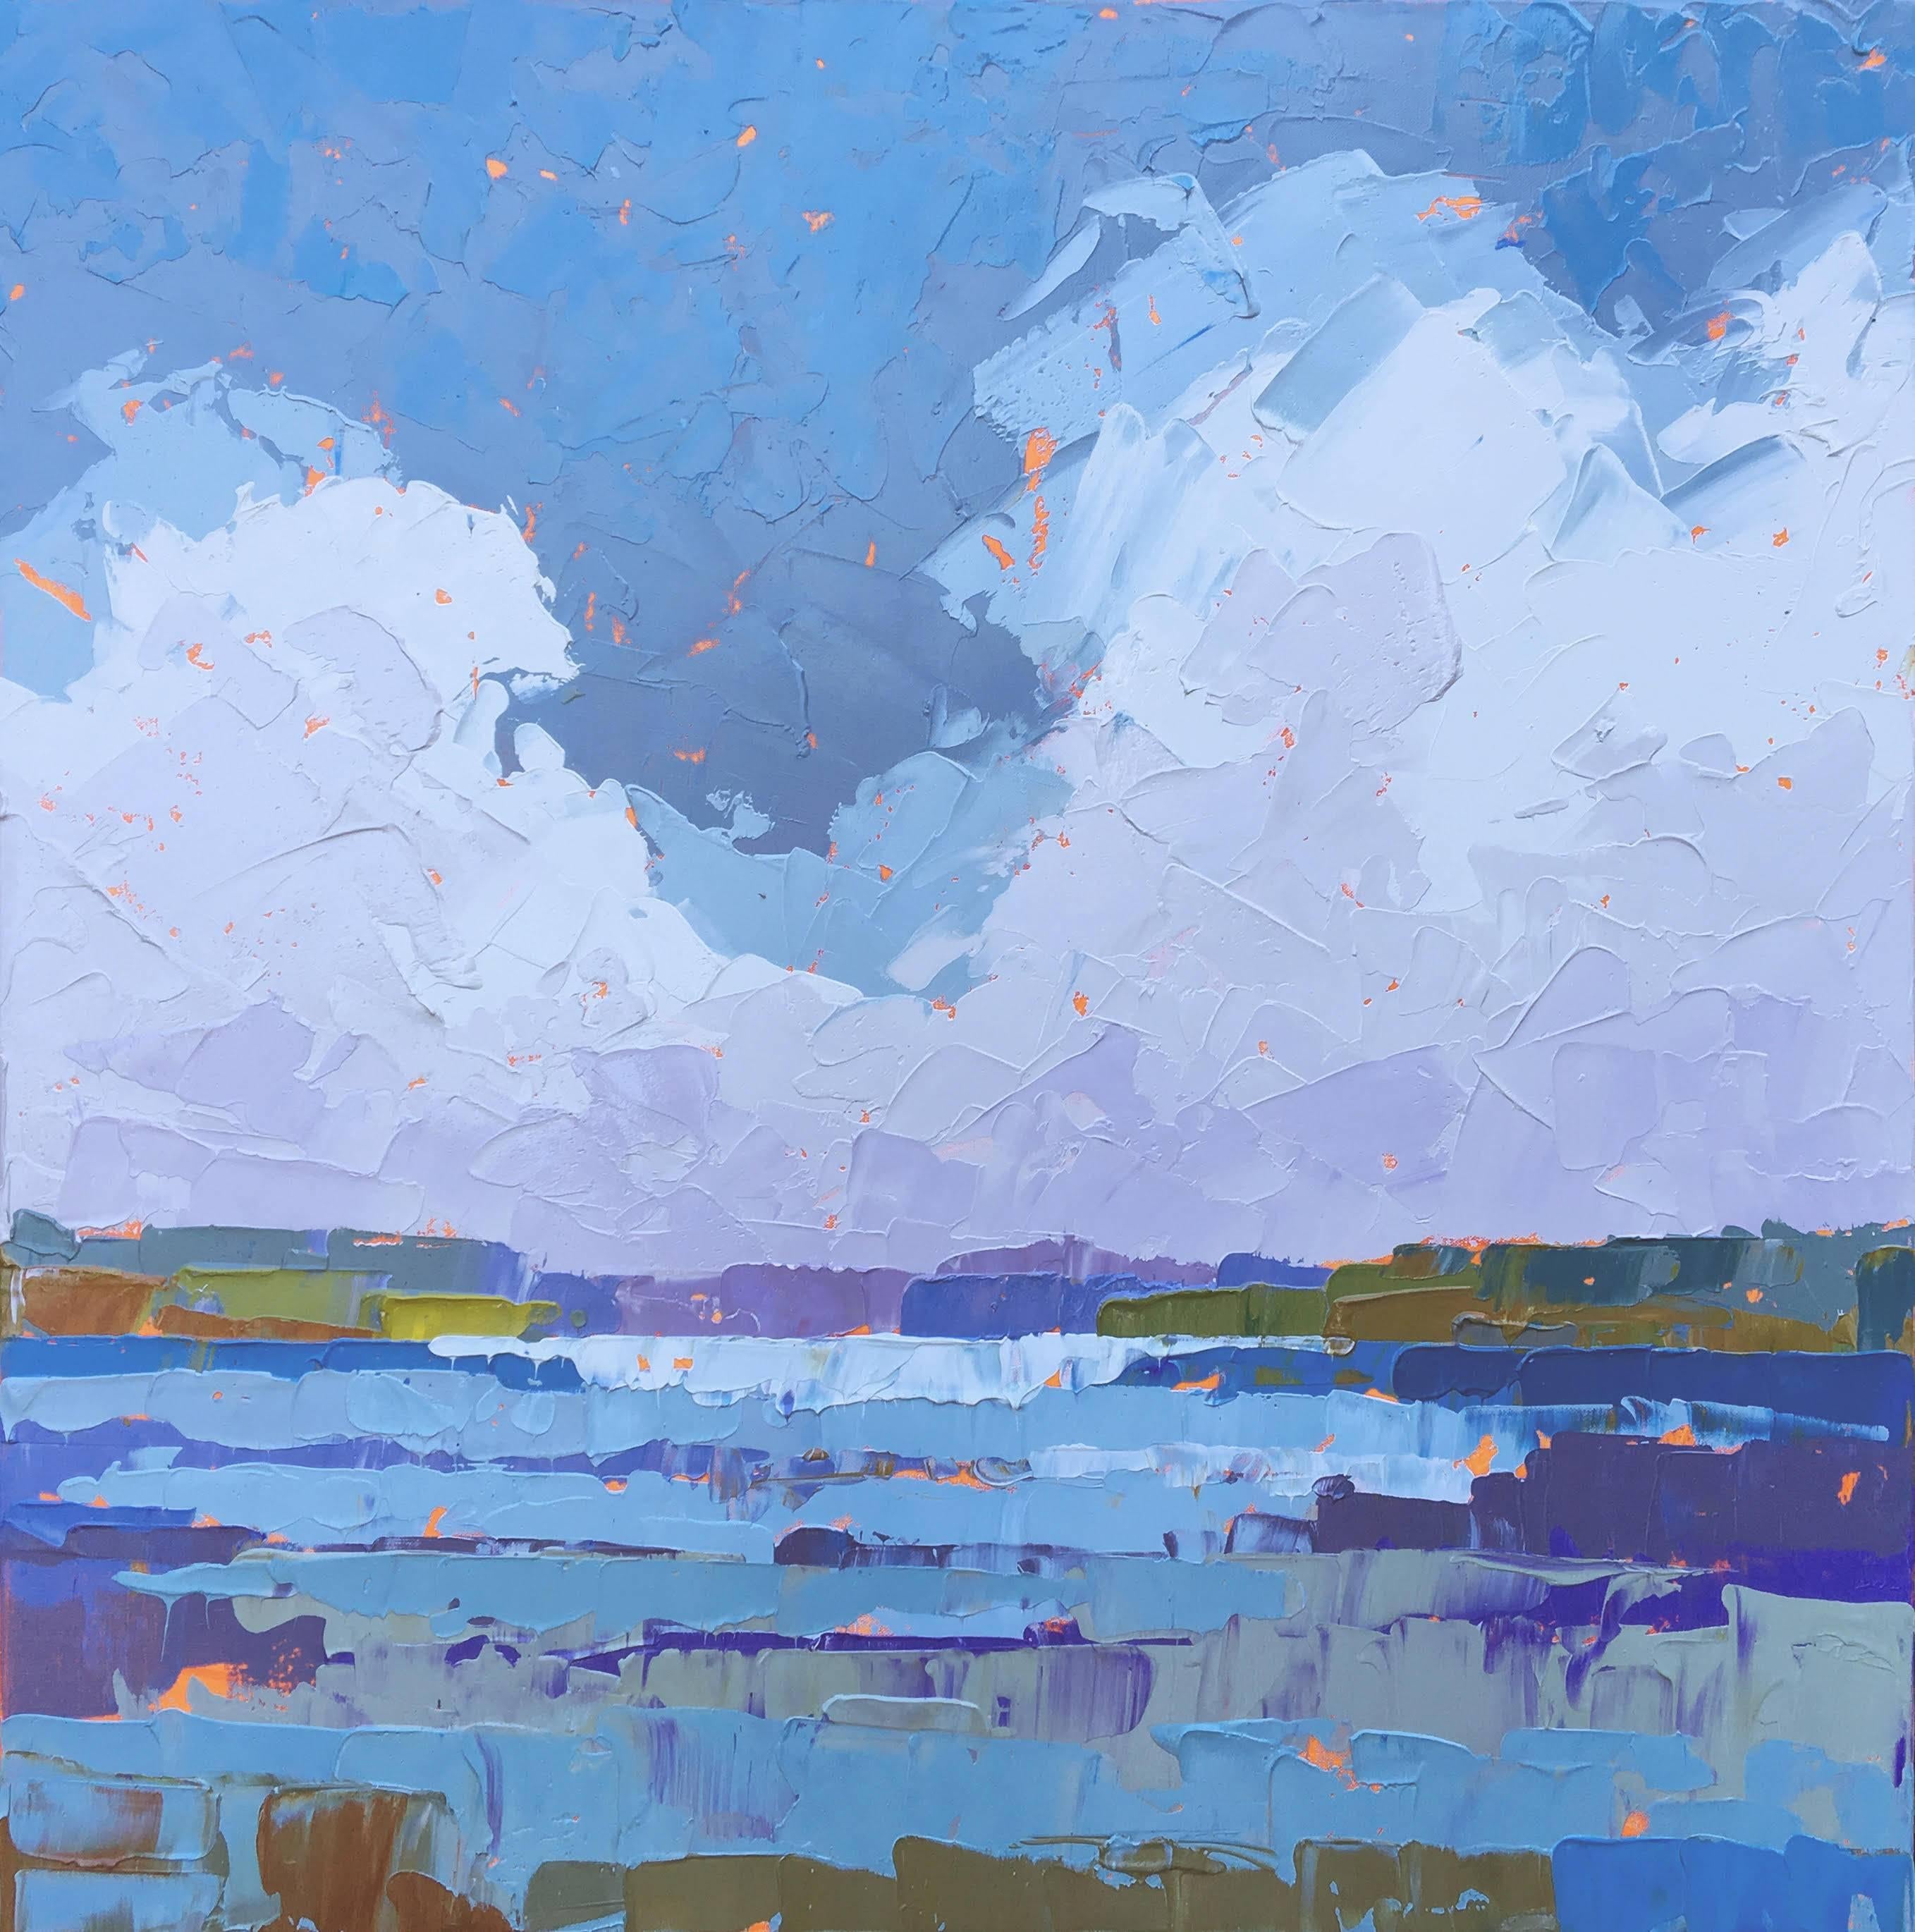 Paul Norwood Landscape Painting – "Climbing Clouds" Painterly Impasto Stormy Seascape in Blues Purples, Cool Hues